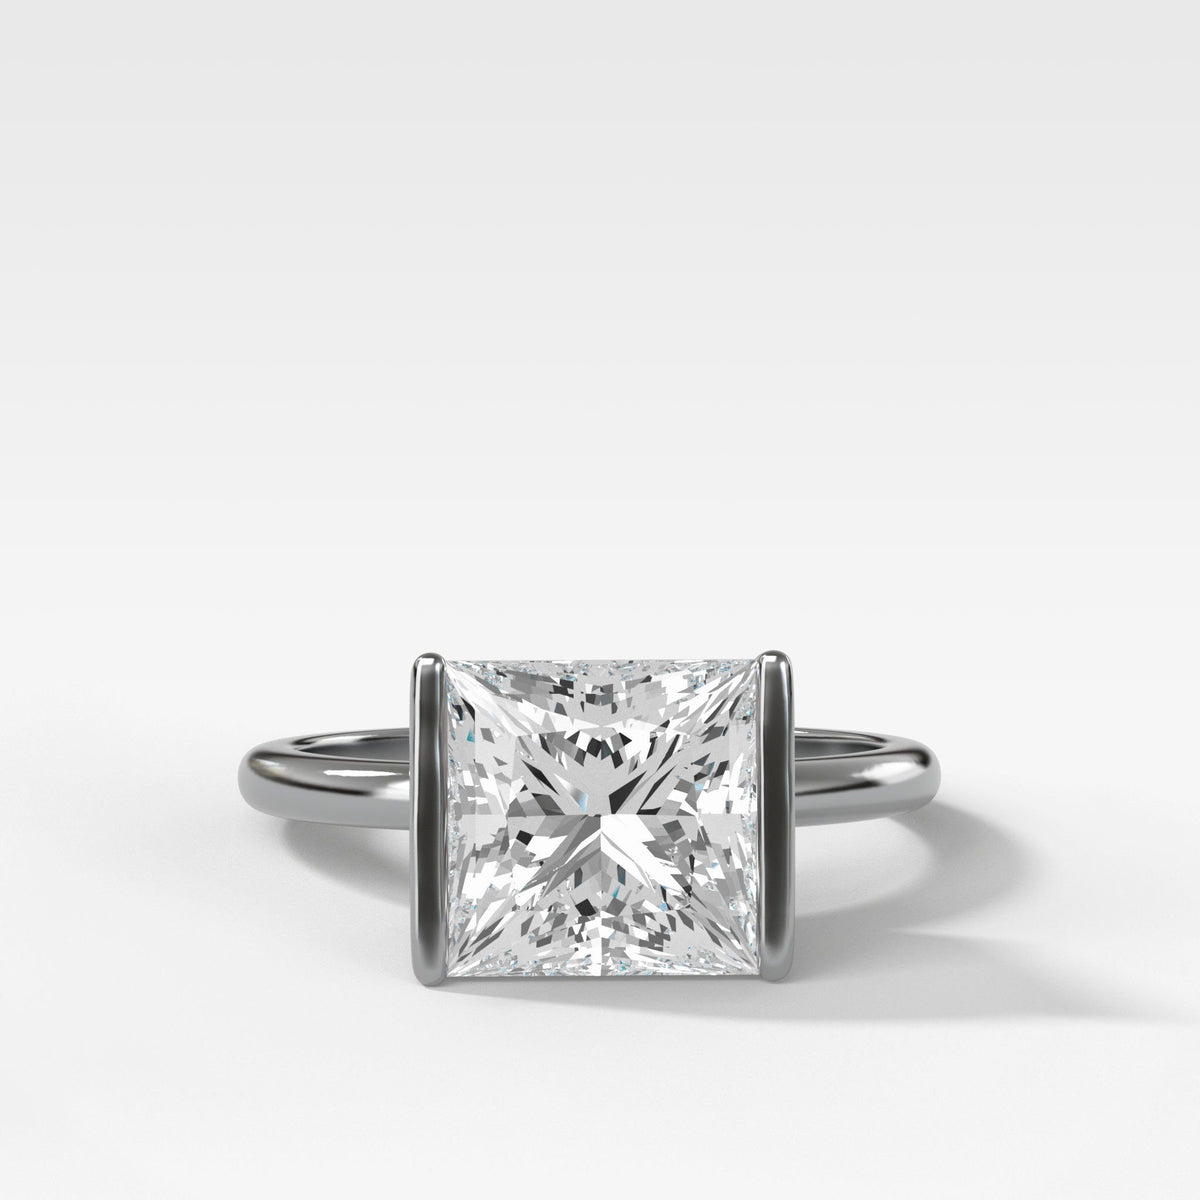 Half Bezel Solitaire Engagement Ring With Princess Cut by Good Stone in White Gold